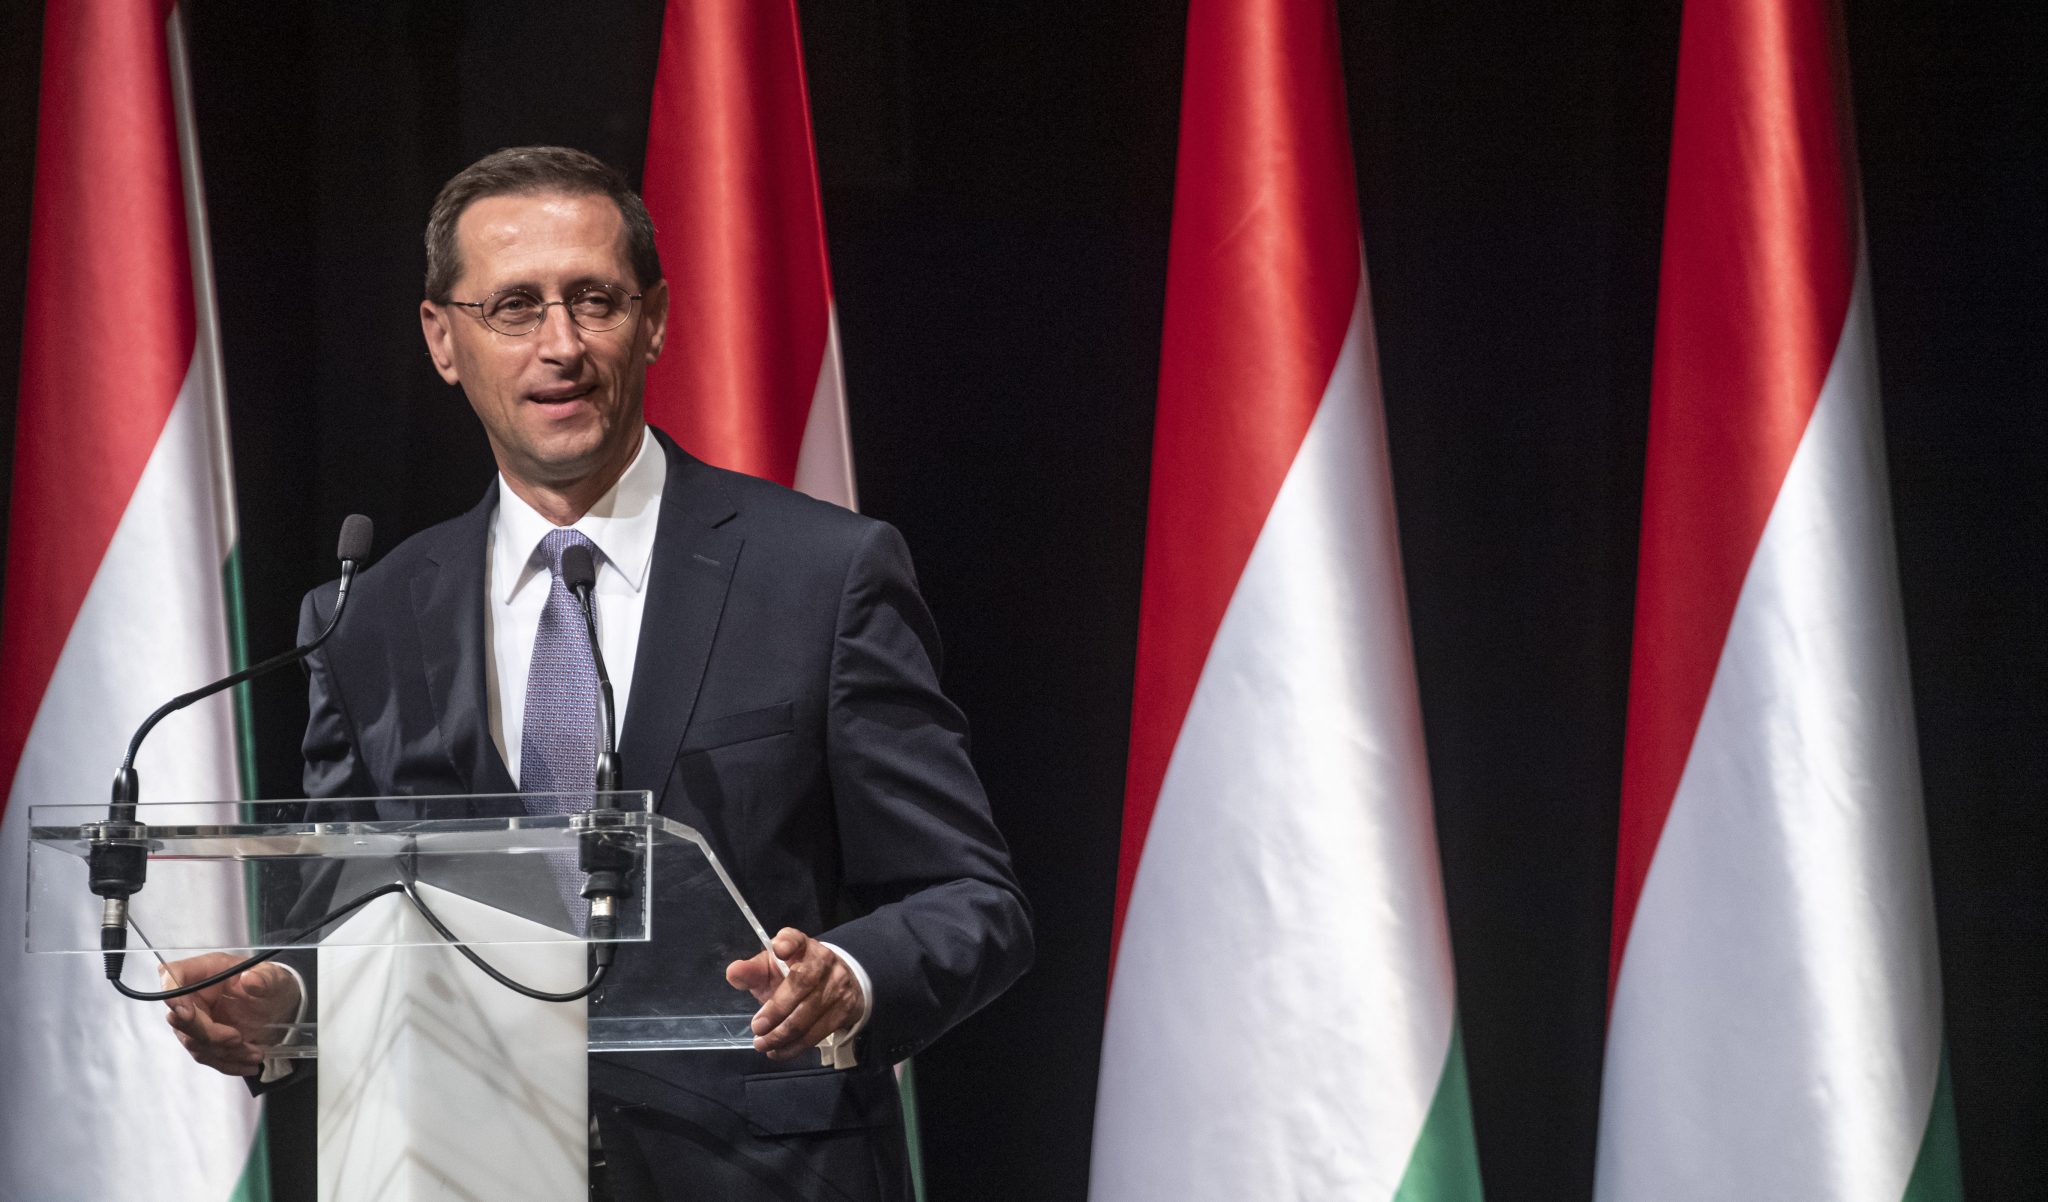 Finance Minister Praises State of Press Freedom in Hungary